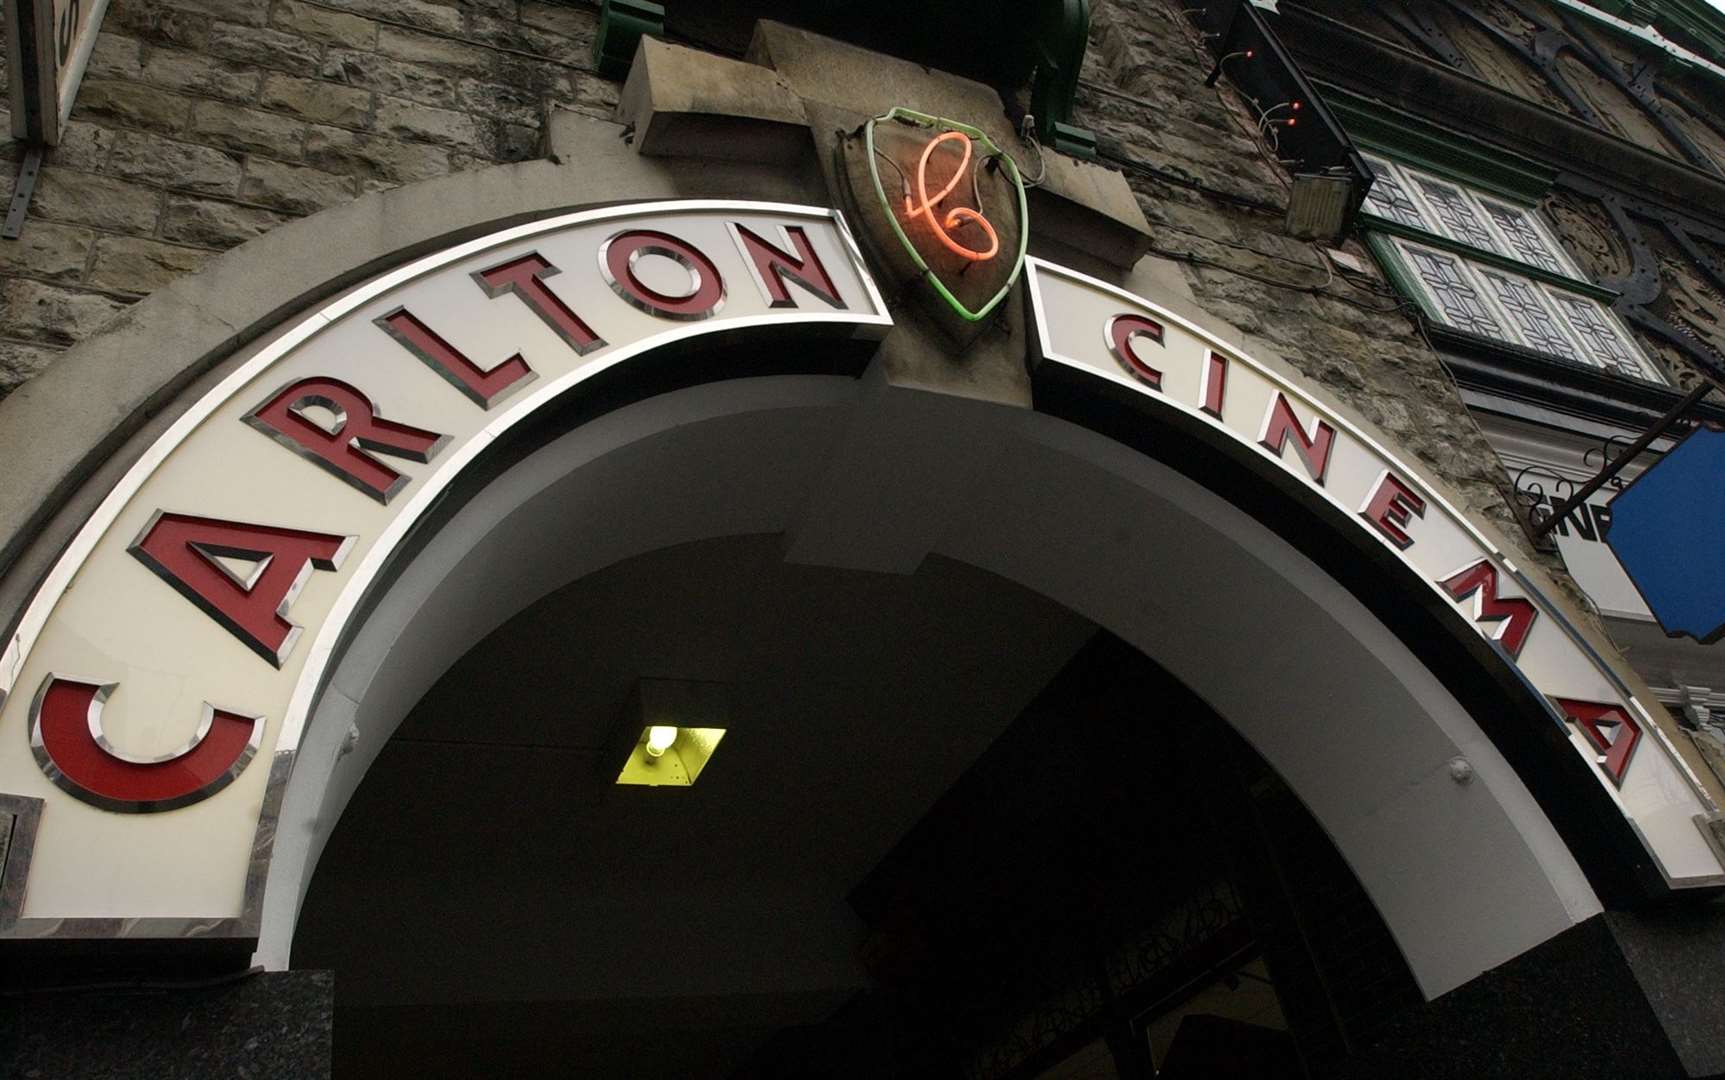 Manager of The Carlton in Westgate Joanne Holmes says the response has been "astounding"